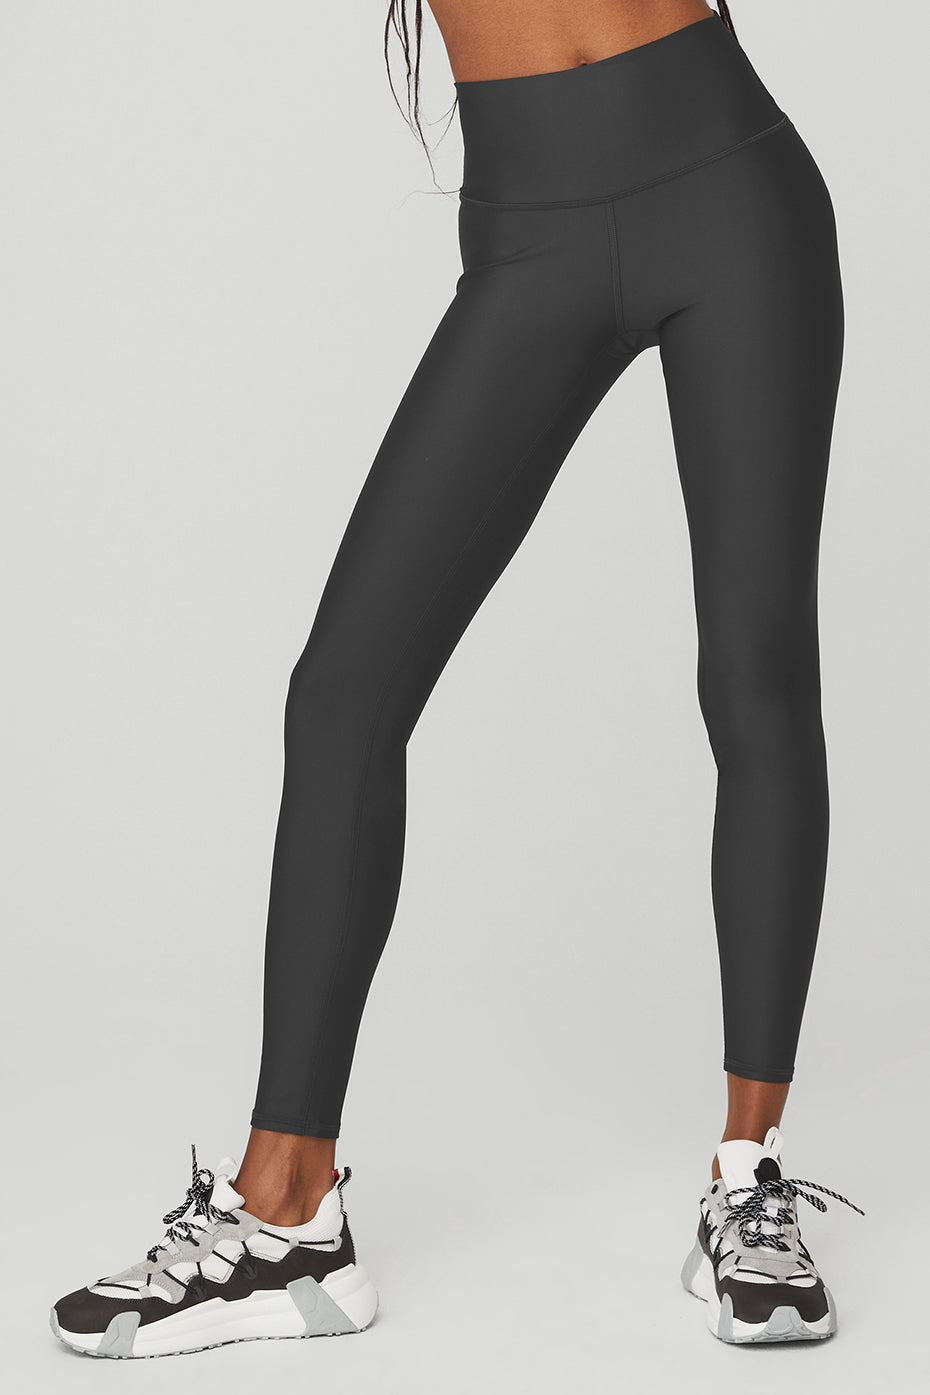 Best Women's Leggings: Top 5 Activewear Pants Most Recommended By Experts -  Study Finds